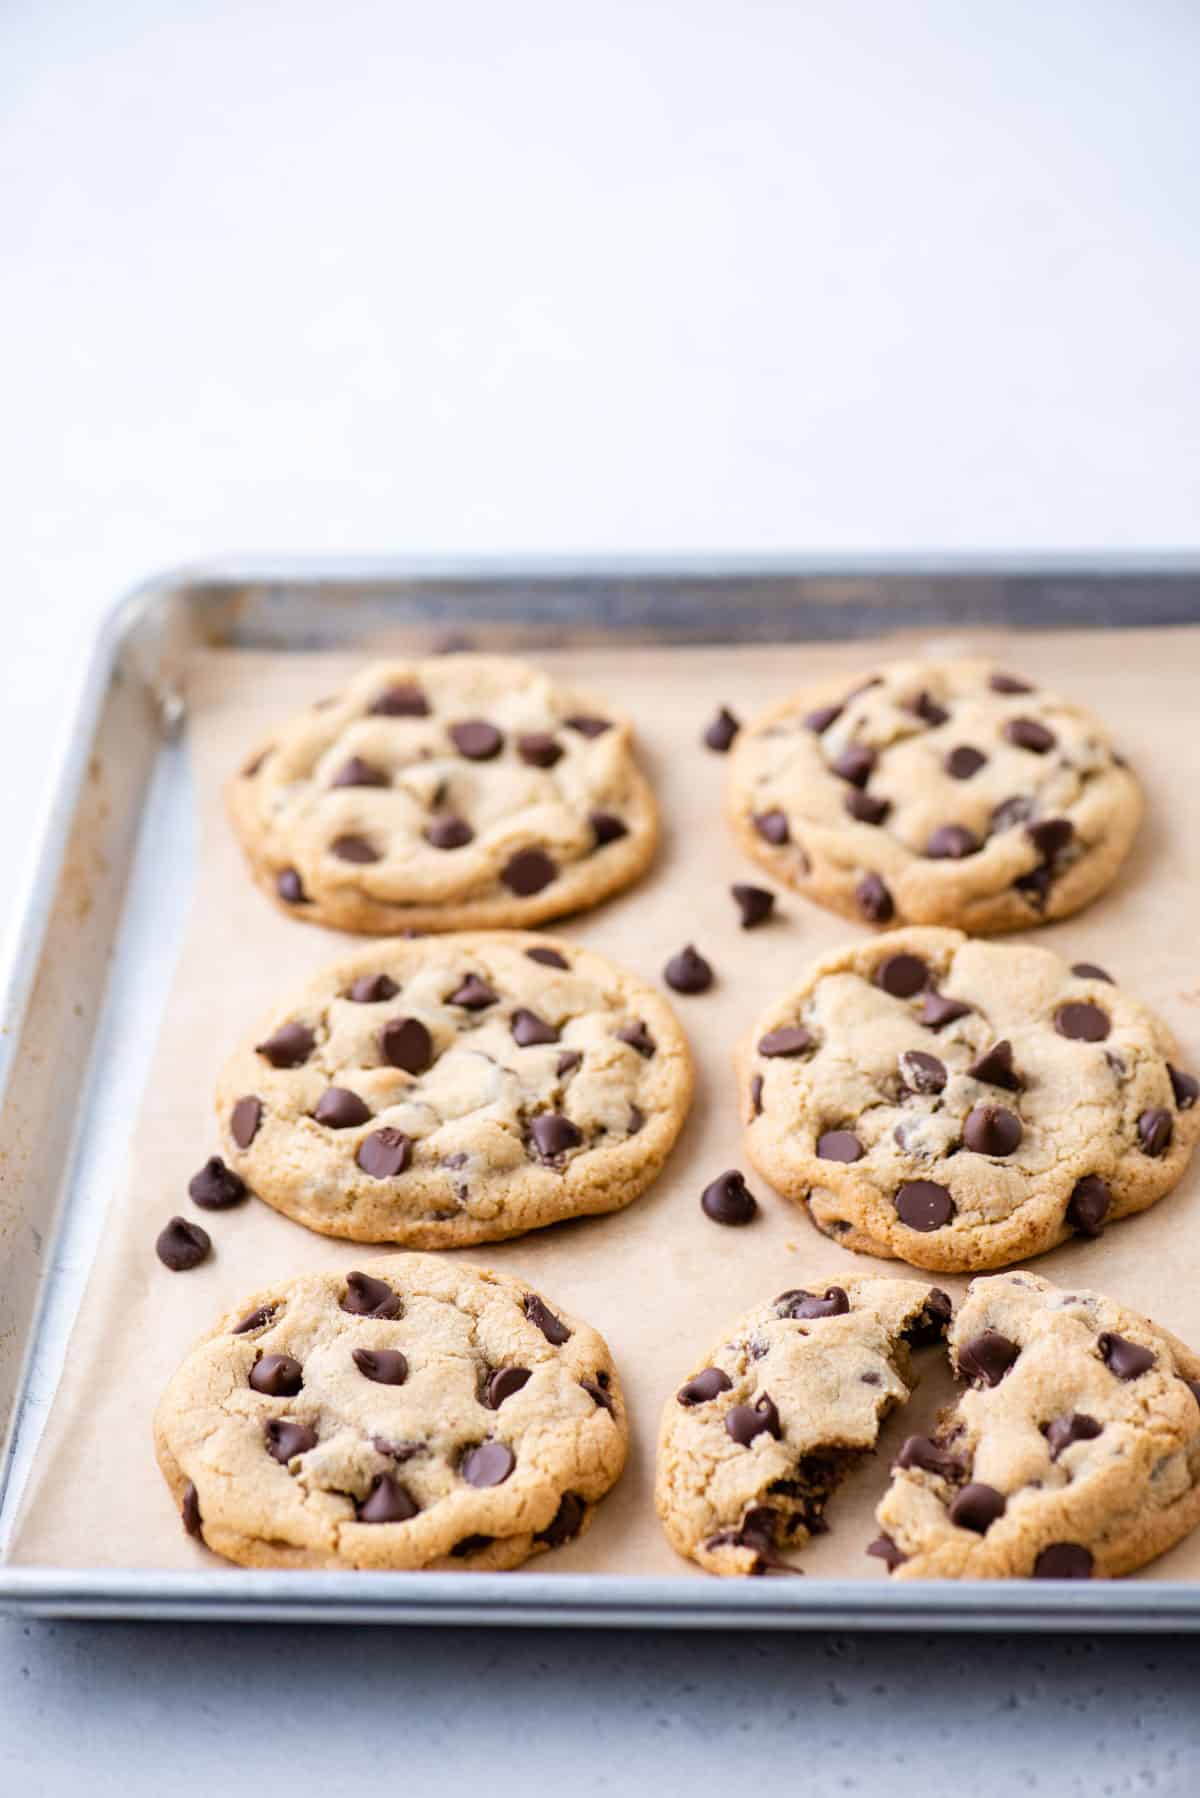 6 chocolate chip cookies on a parchment-lined baking sheet, with one broken in half